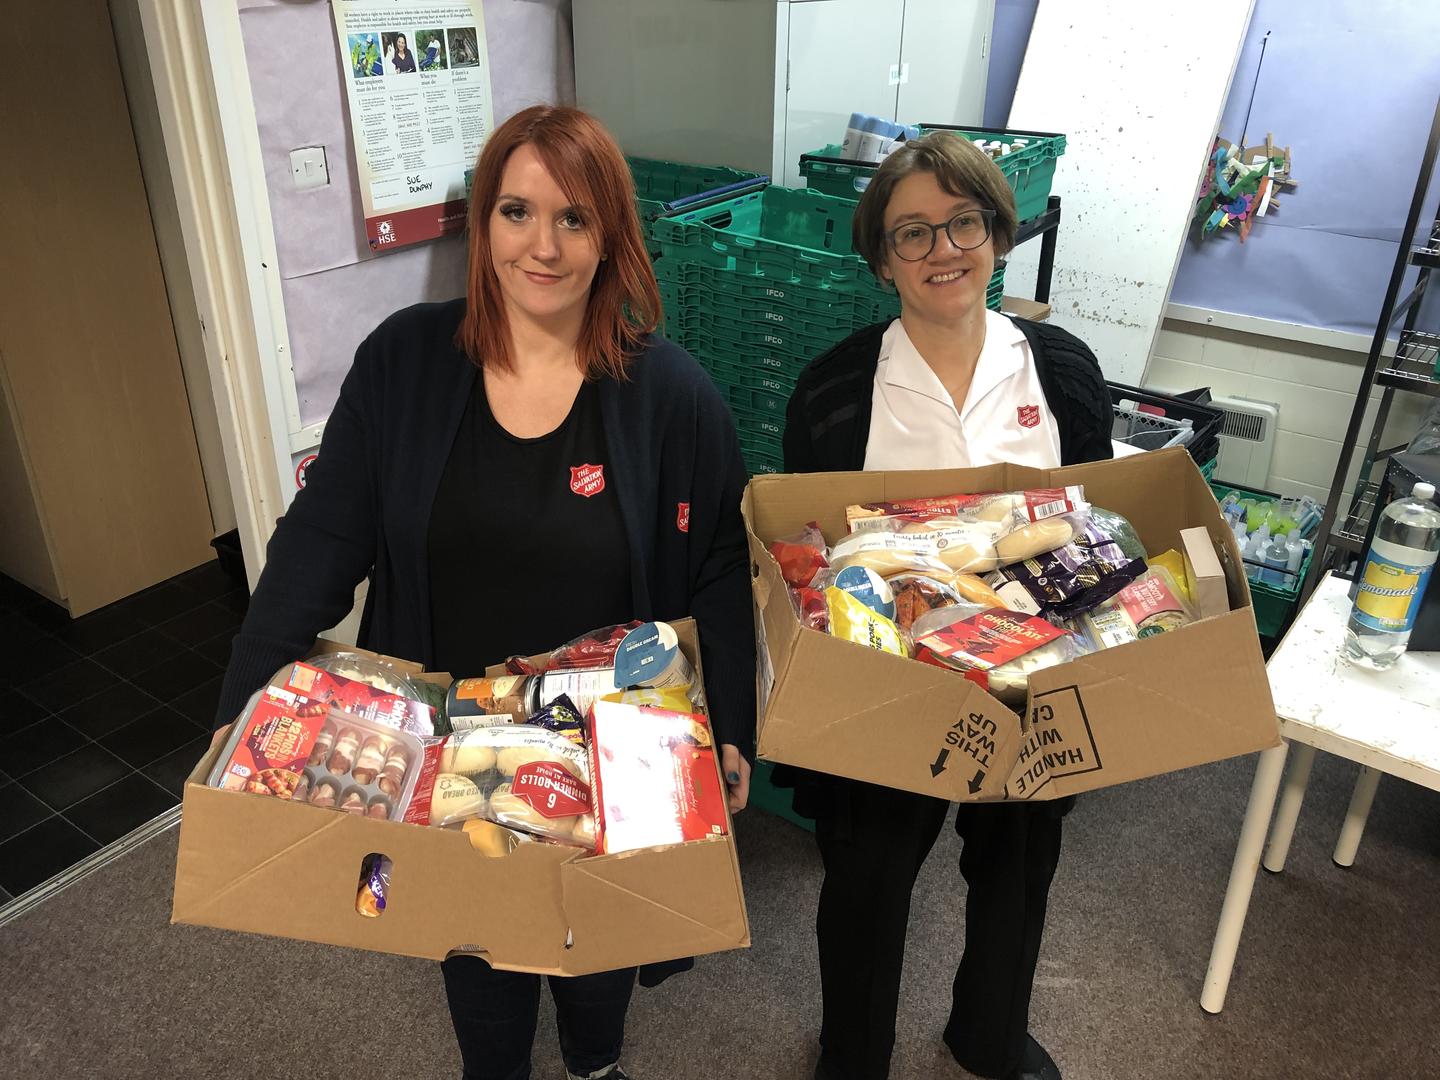 1,000 Oldham children fed thanks to The Salvation Army